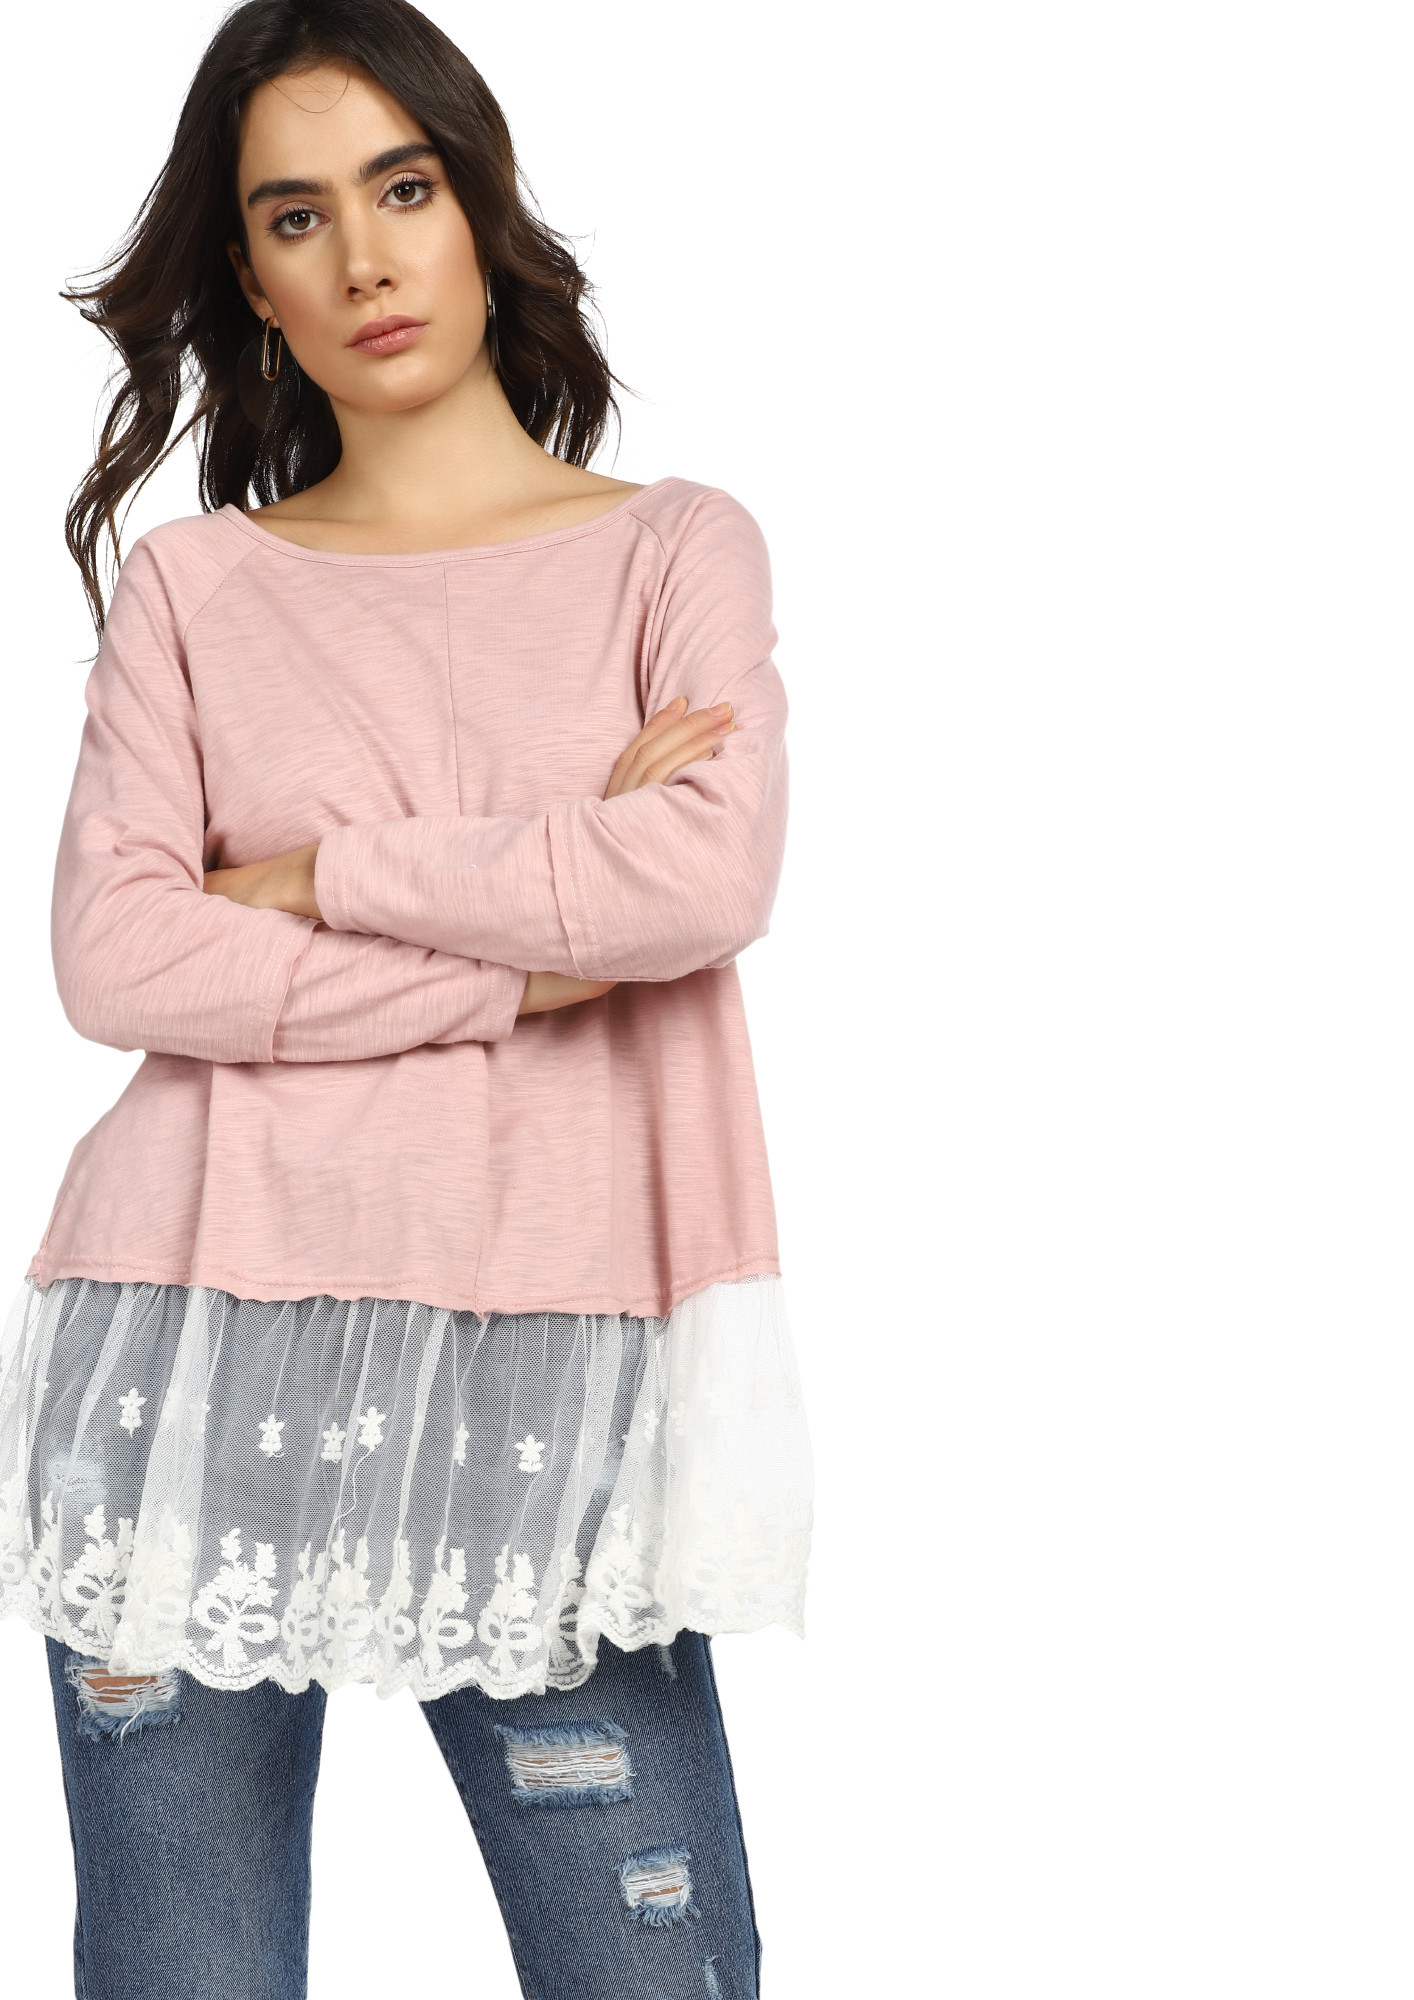 EXTENDING COMPASSION CHALKY PINK LONGLINE T-SHIRT